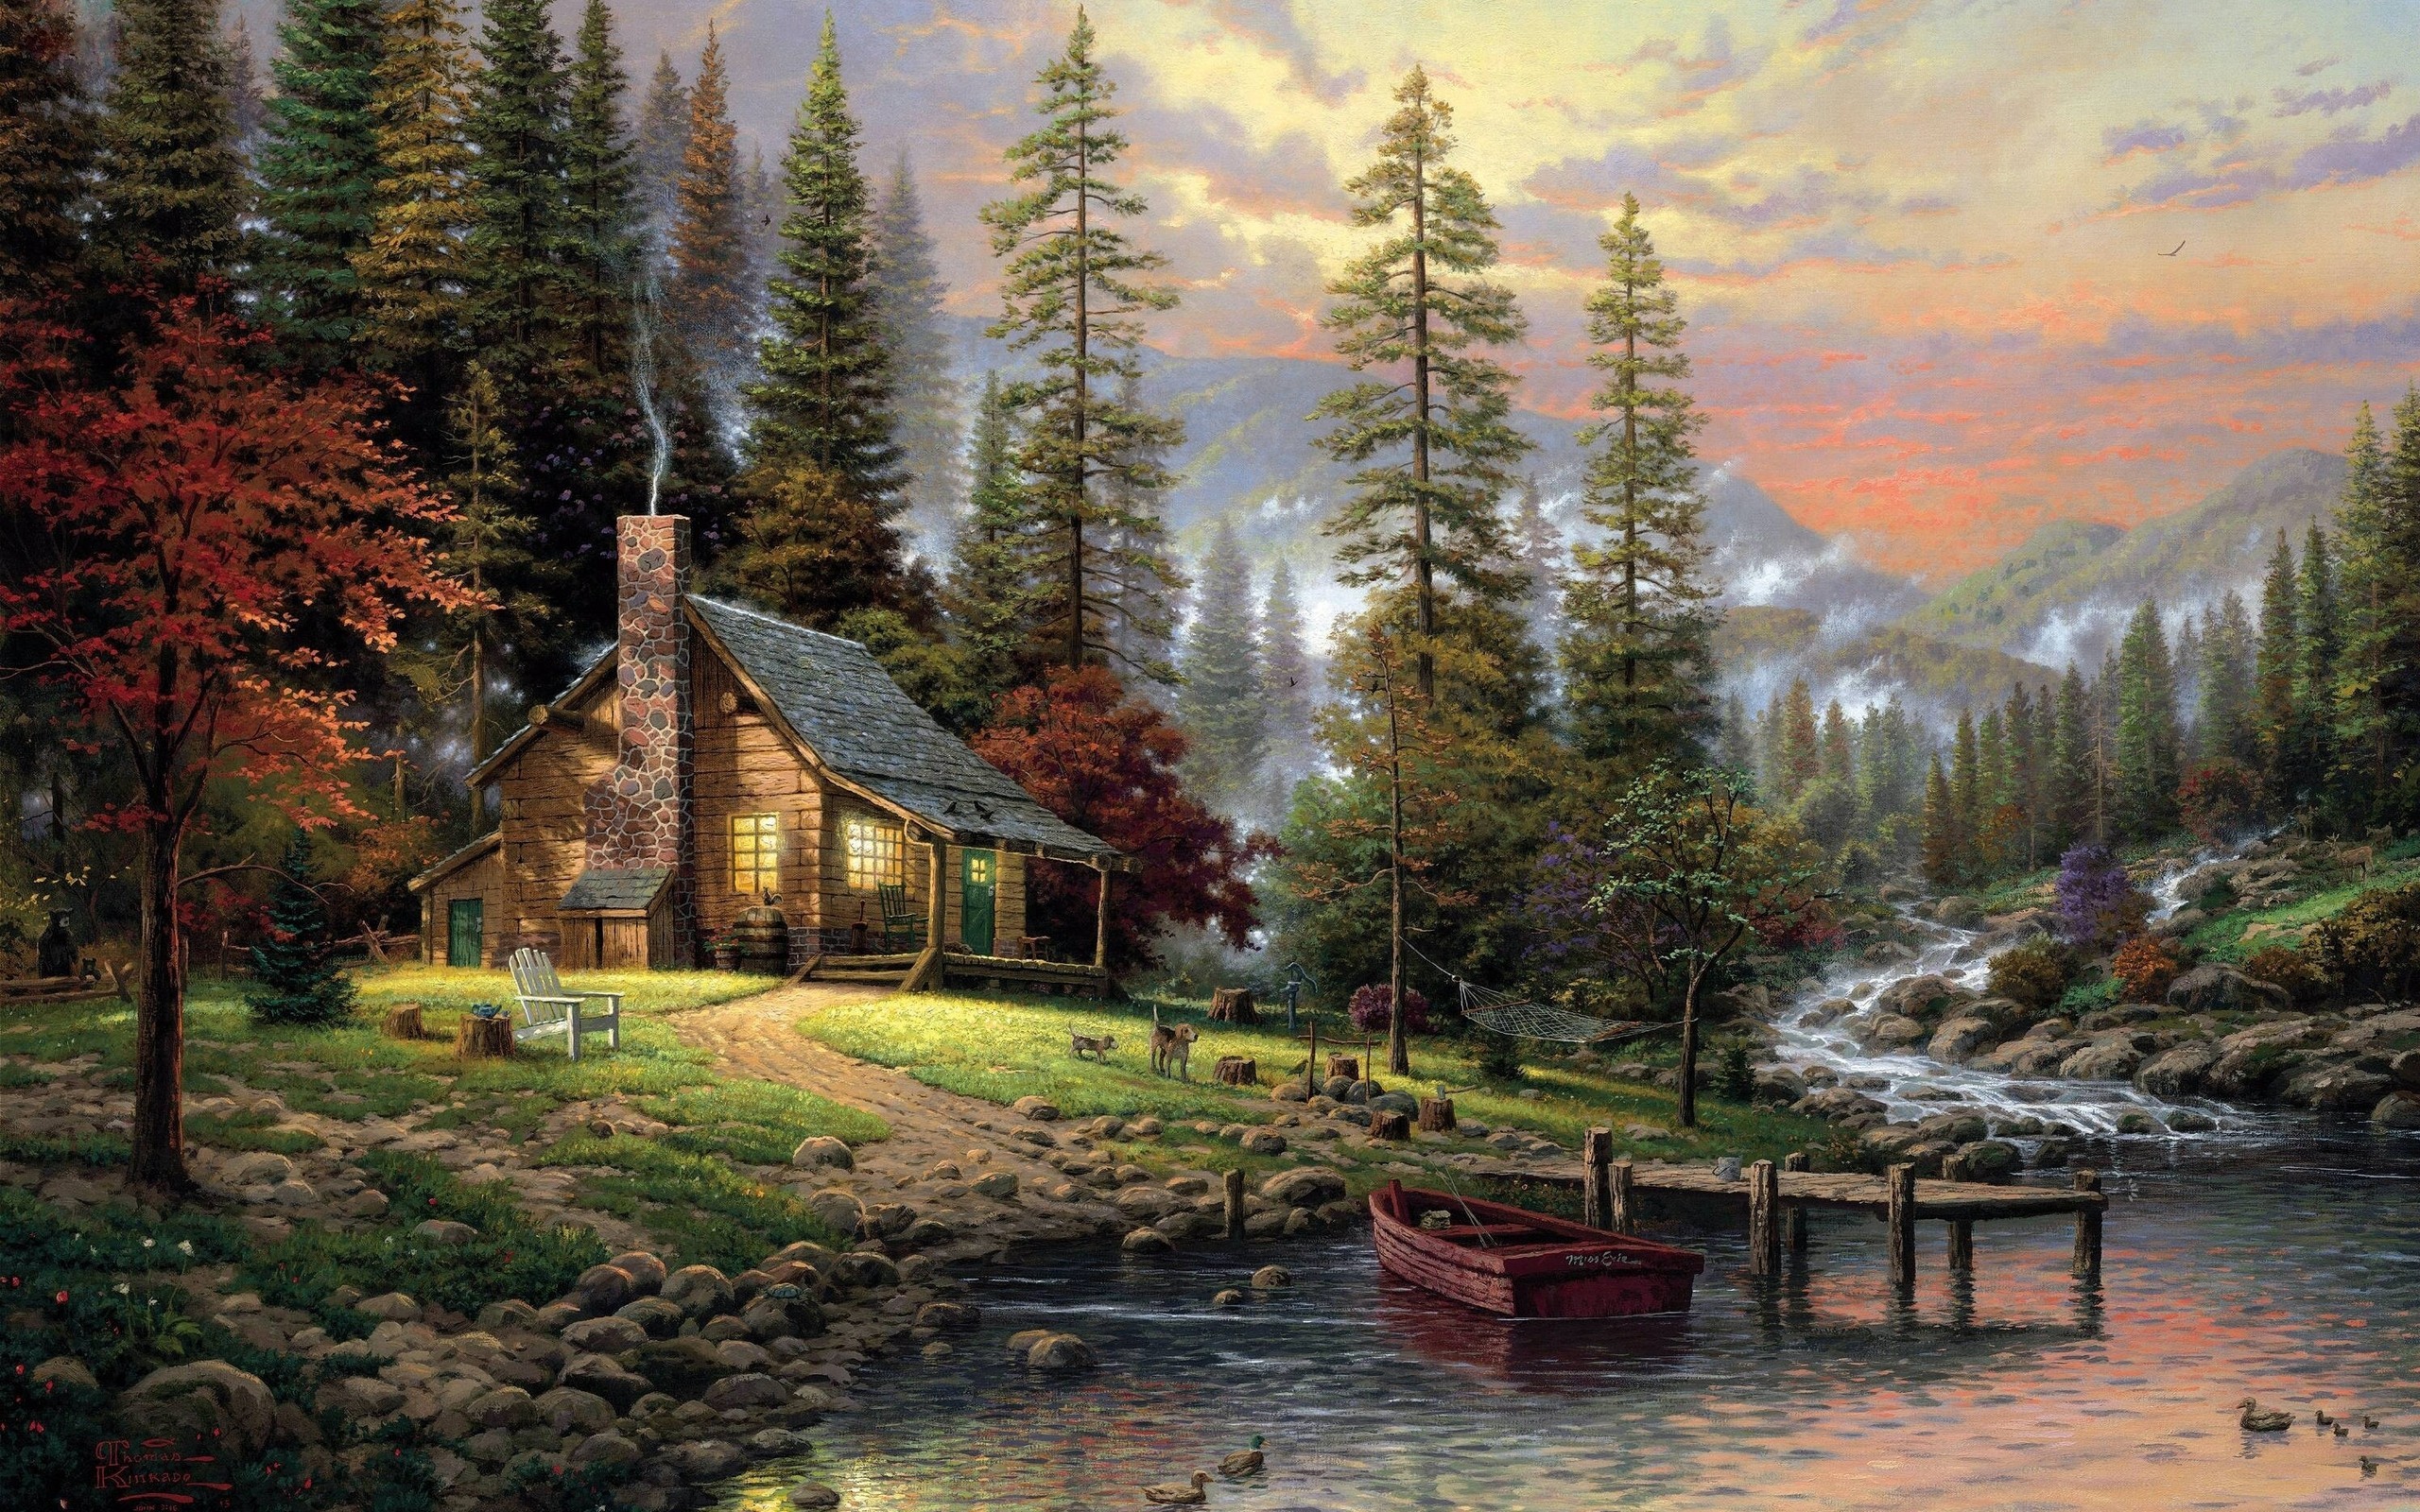 General 2560x1600 mountains nature landscape river painting forest pier boat cottage trees stream stones chair chimneys artwork Thomas Kinkade